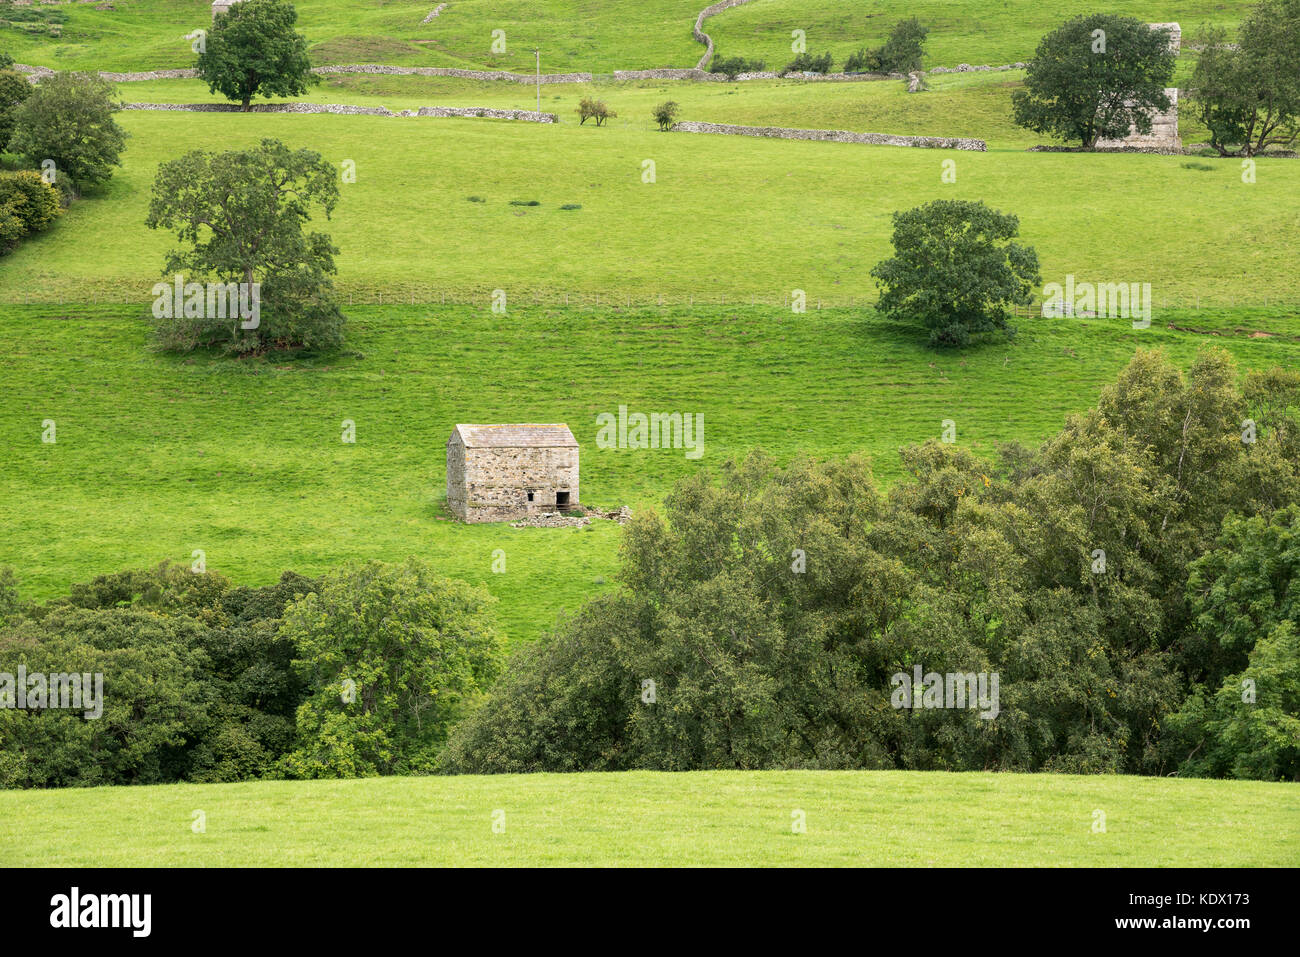 Traditional stone barn or 'Cow House' near Muker in Swaledale, Yorkshire Dales national park, England. Stock Photo